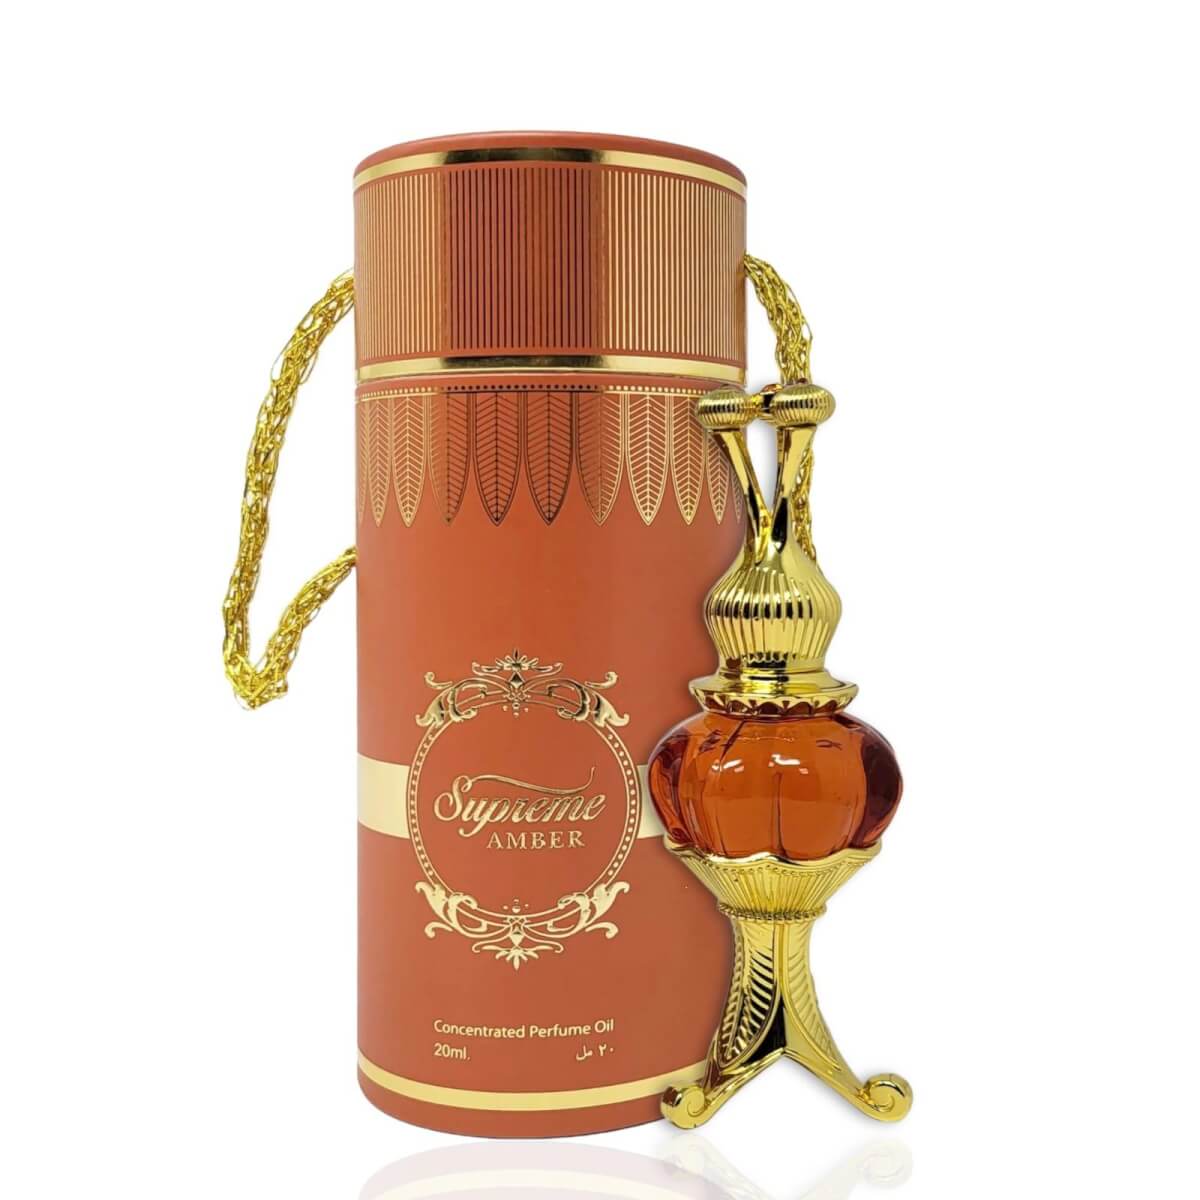 Supreme Amber Concentrated Perfume Oil / Attar 20Ml By Bait Al Bakhoor